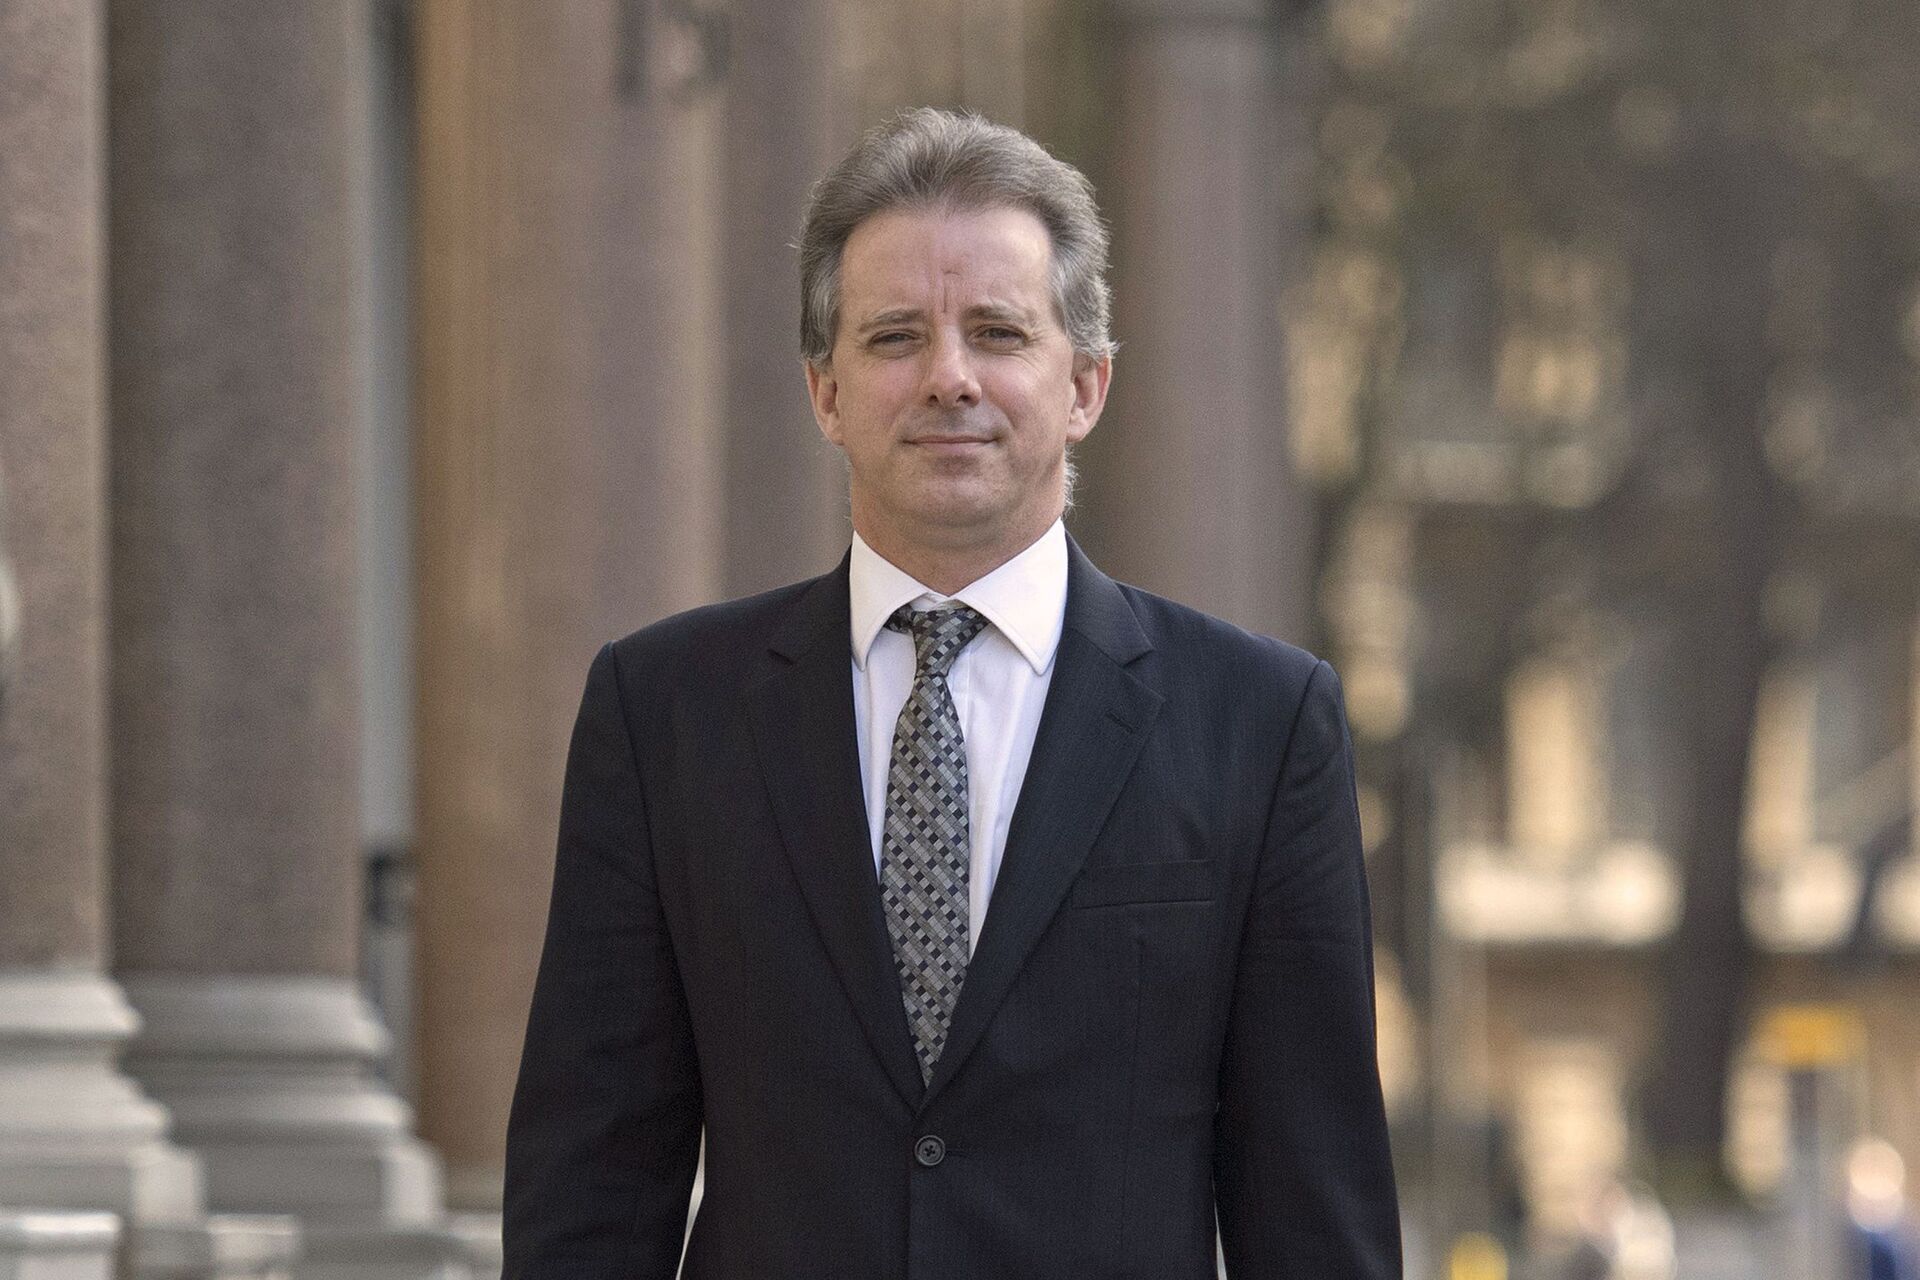 FILE - This Tuesday, March 7, 2017 file photo shows Christopher Steele, the former MI6 agent who set up Orbis Business Intelligence and compiled a dossier on Donald Trump, in London - Sputnik International, 1920, 07.09.2021